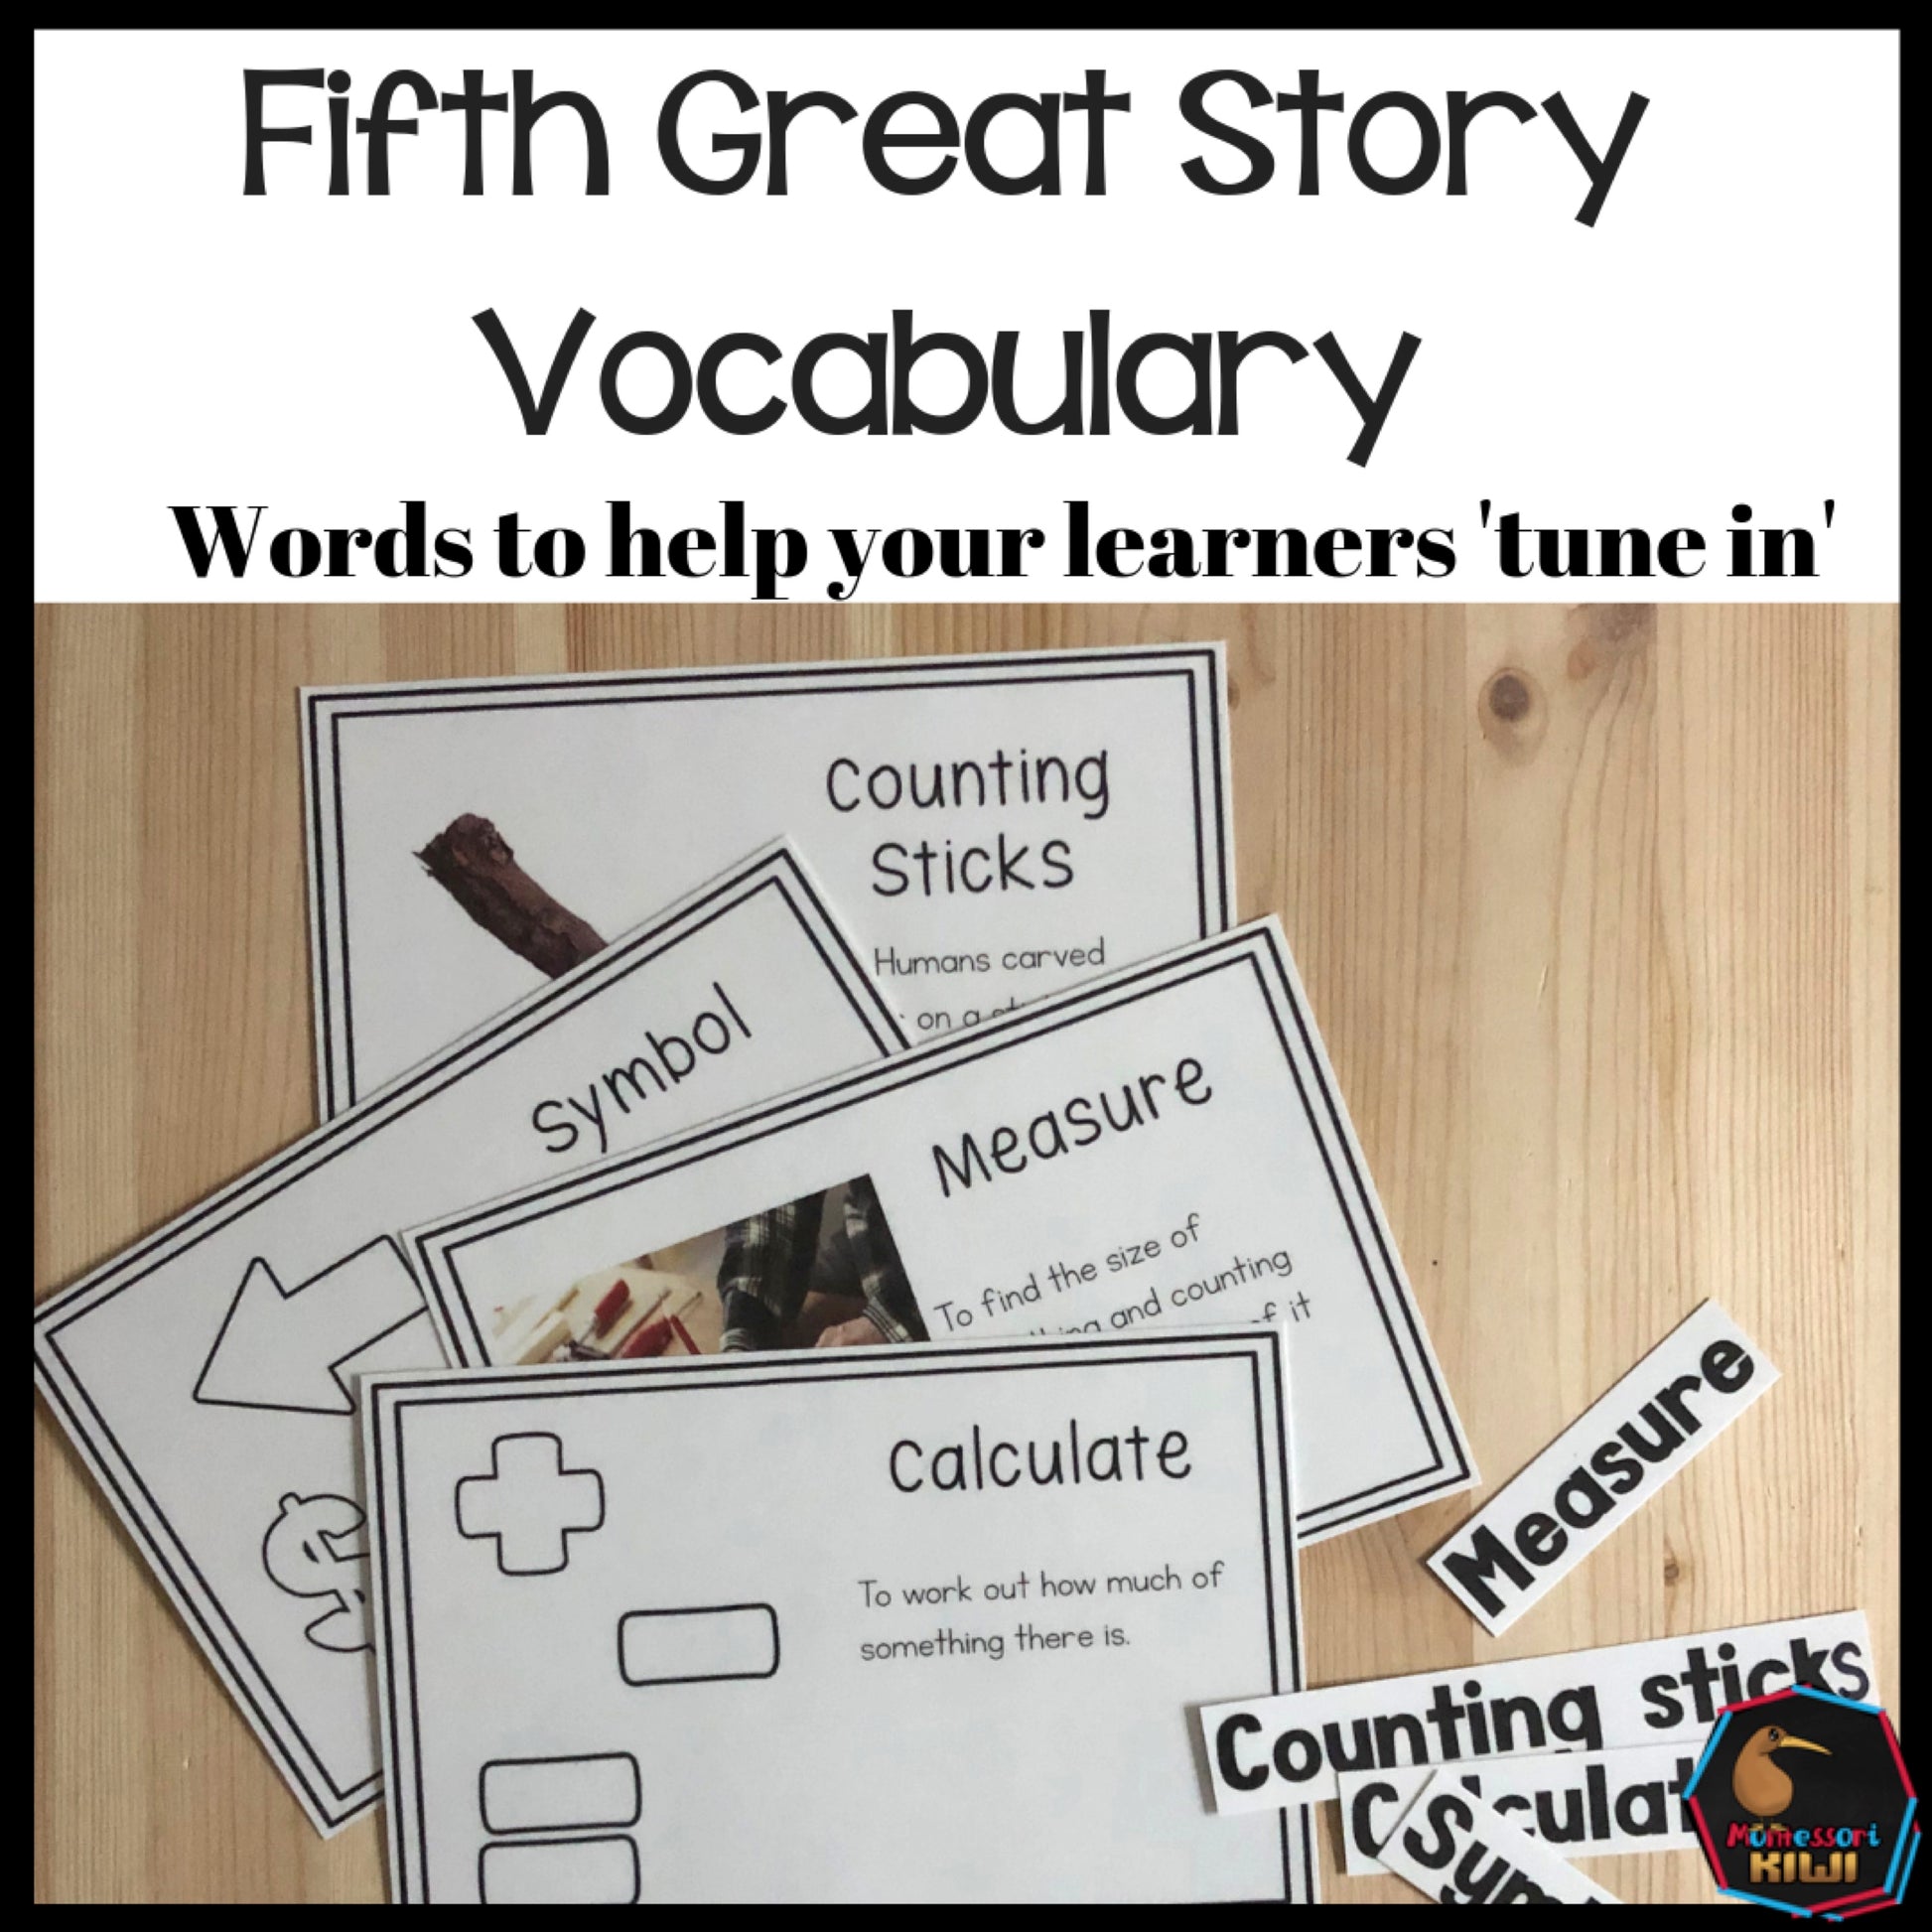 Vocab Words for Fifth Great Story (cosmic) - montessorikiwi